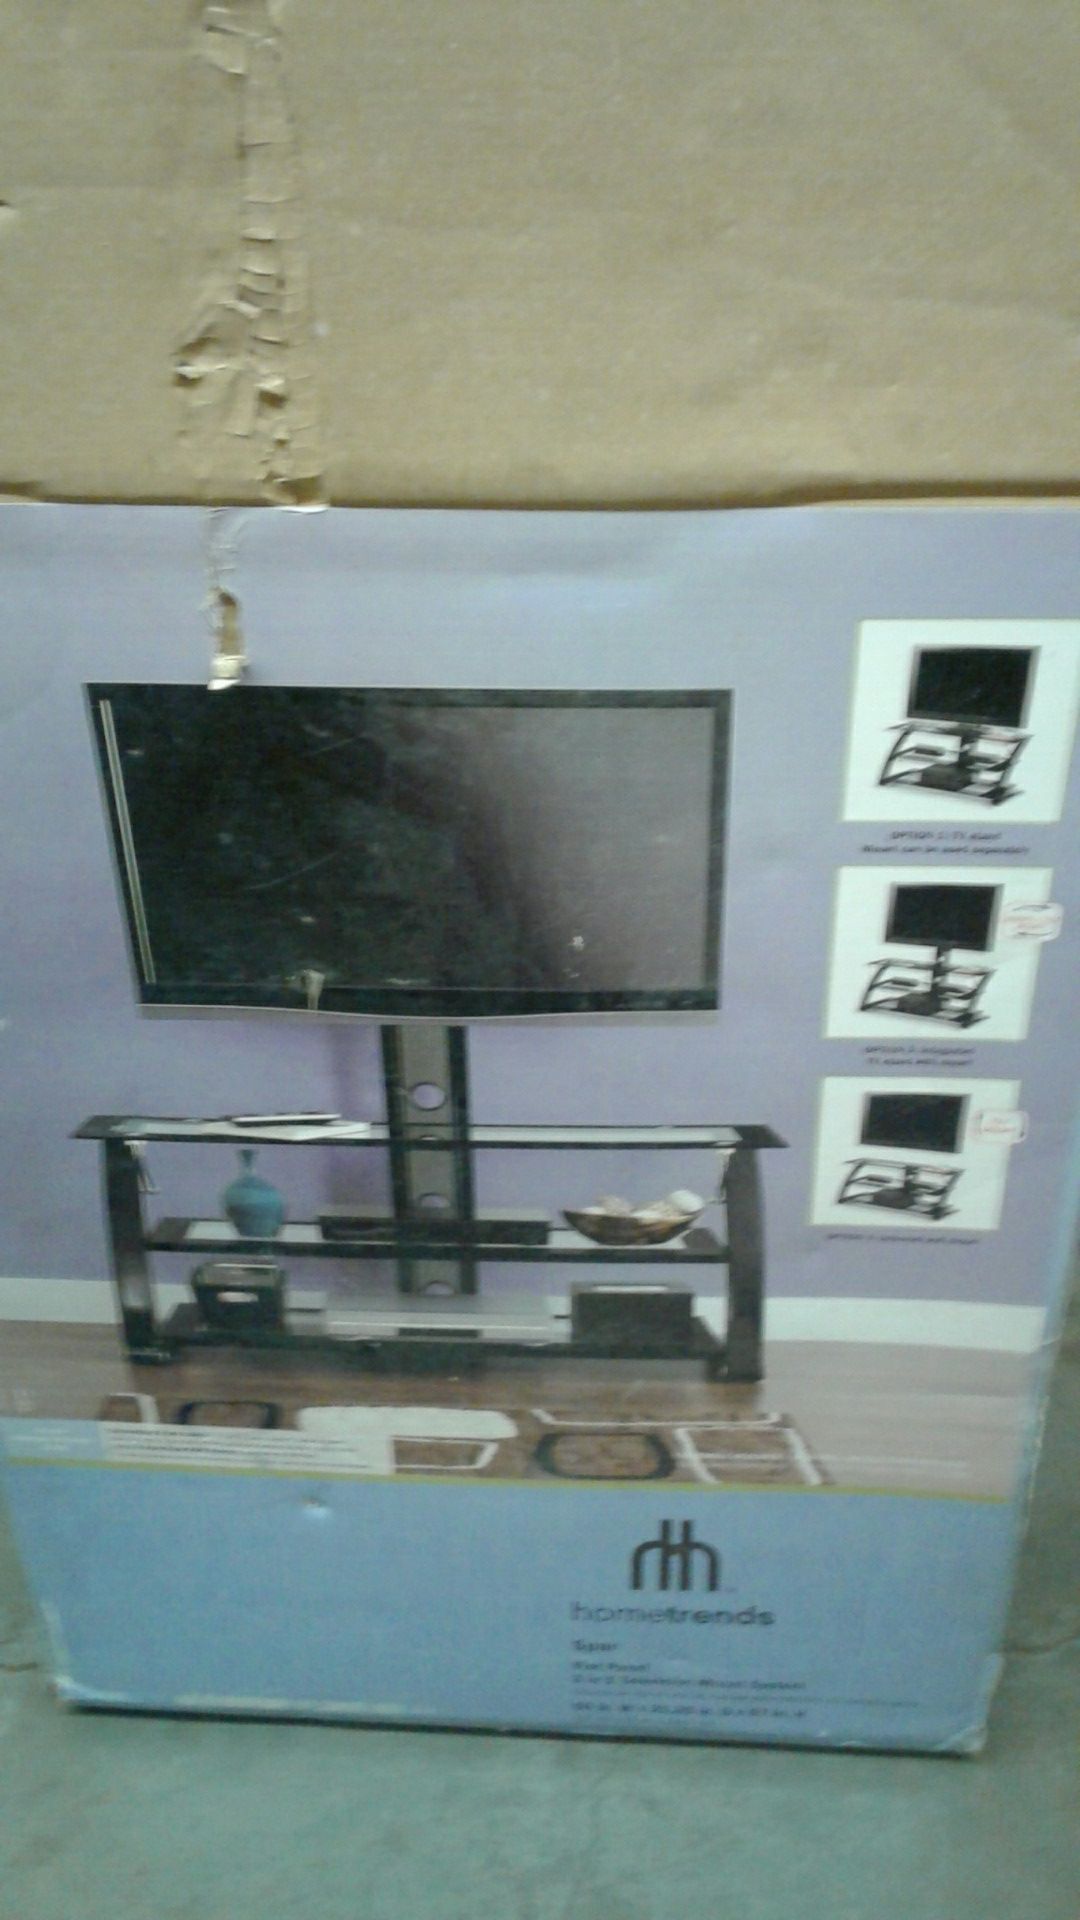 FLAT PANEL 3 IN 1 for t.v. Stand.new never Open box.